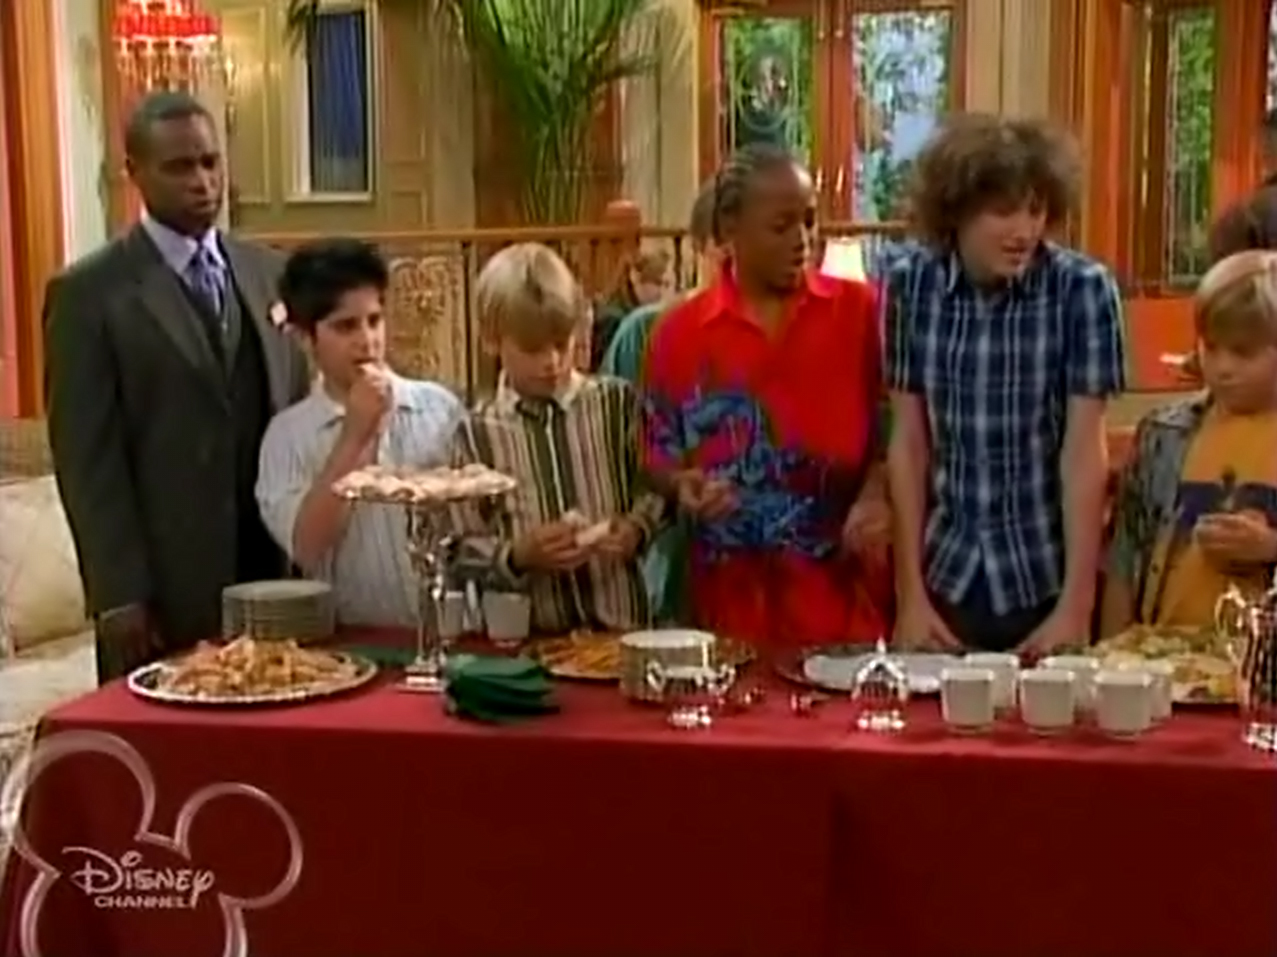 suite life of zack and cody season 3 episode 17